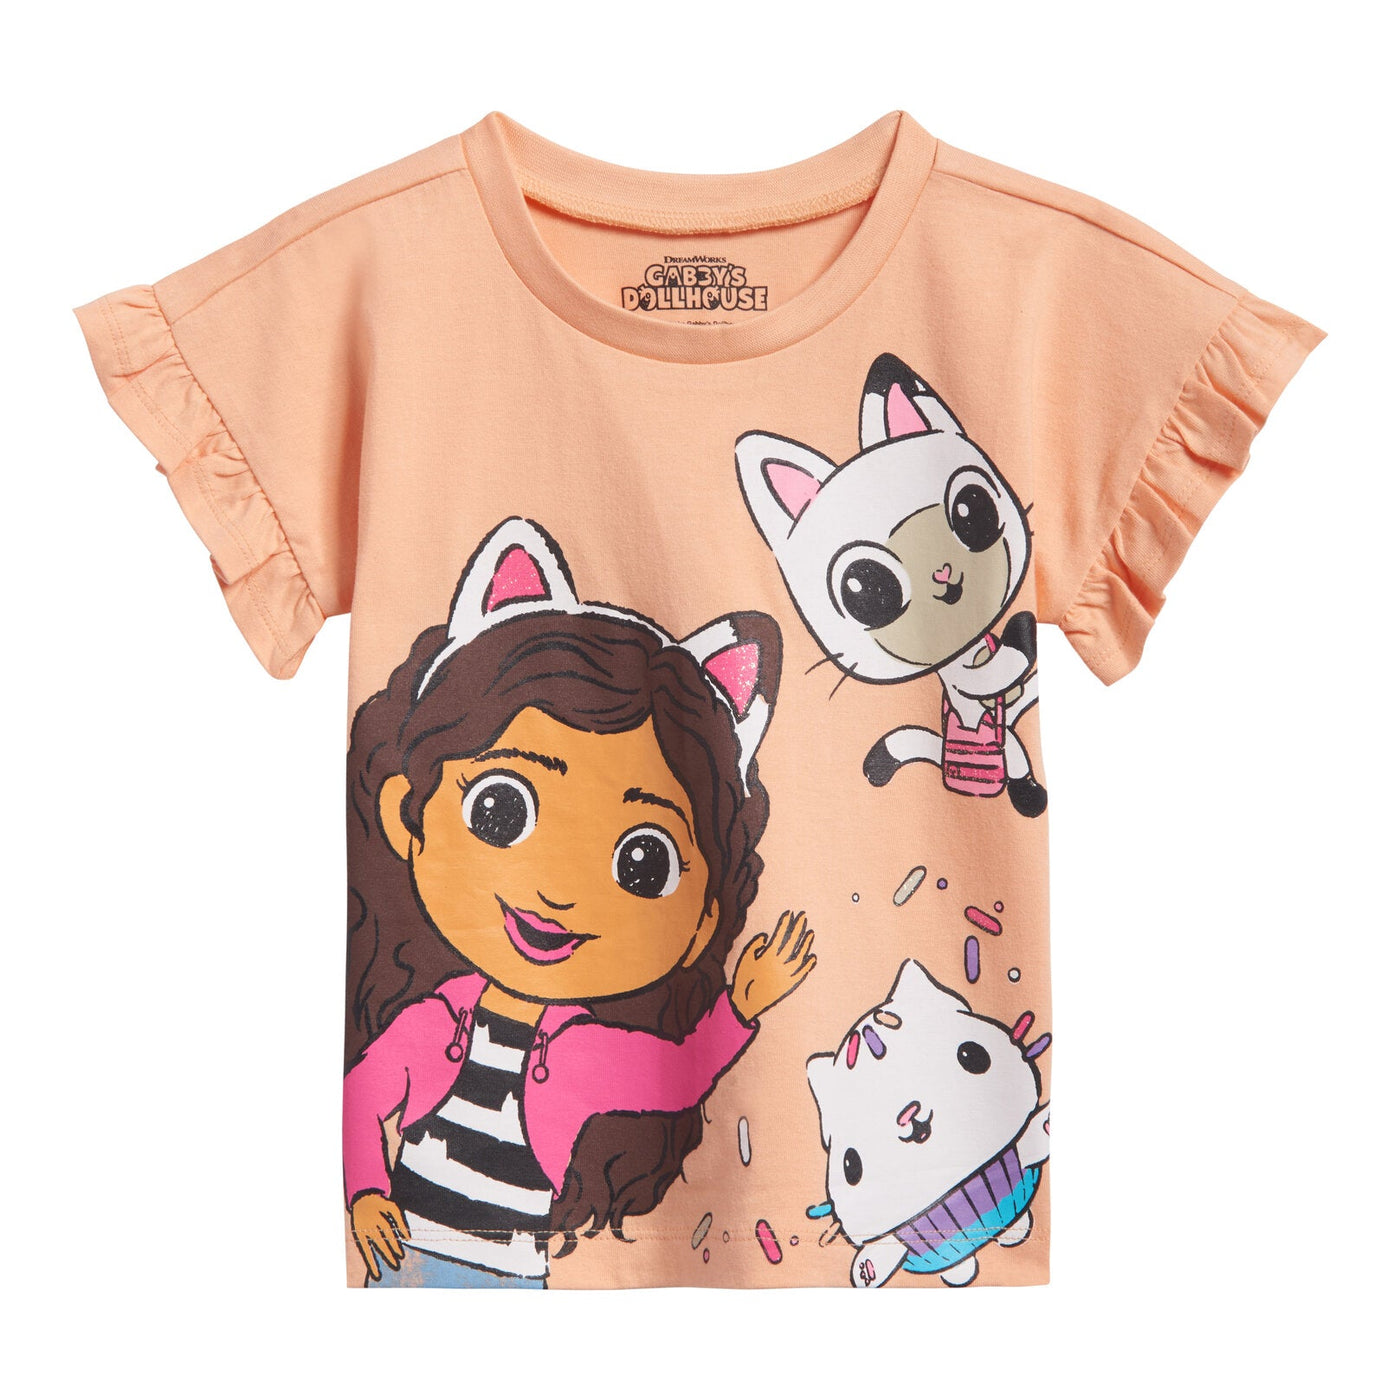 Dreamworks Gabby's Dollhouse T-Shirt and Chambray Shorts Outfit Set - imagikids